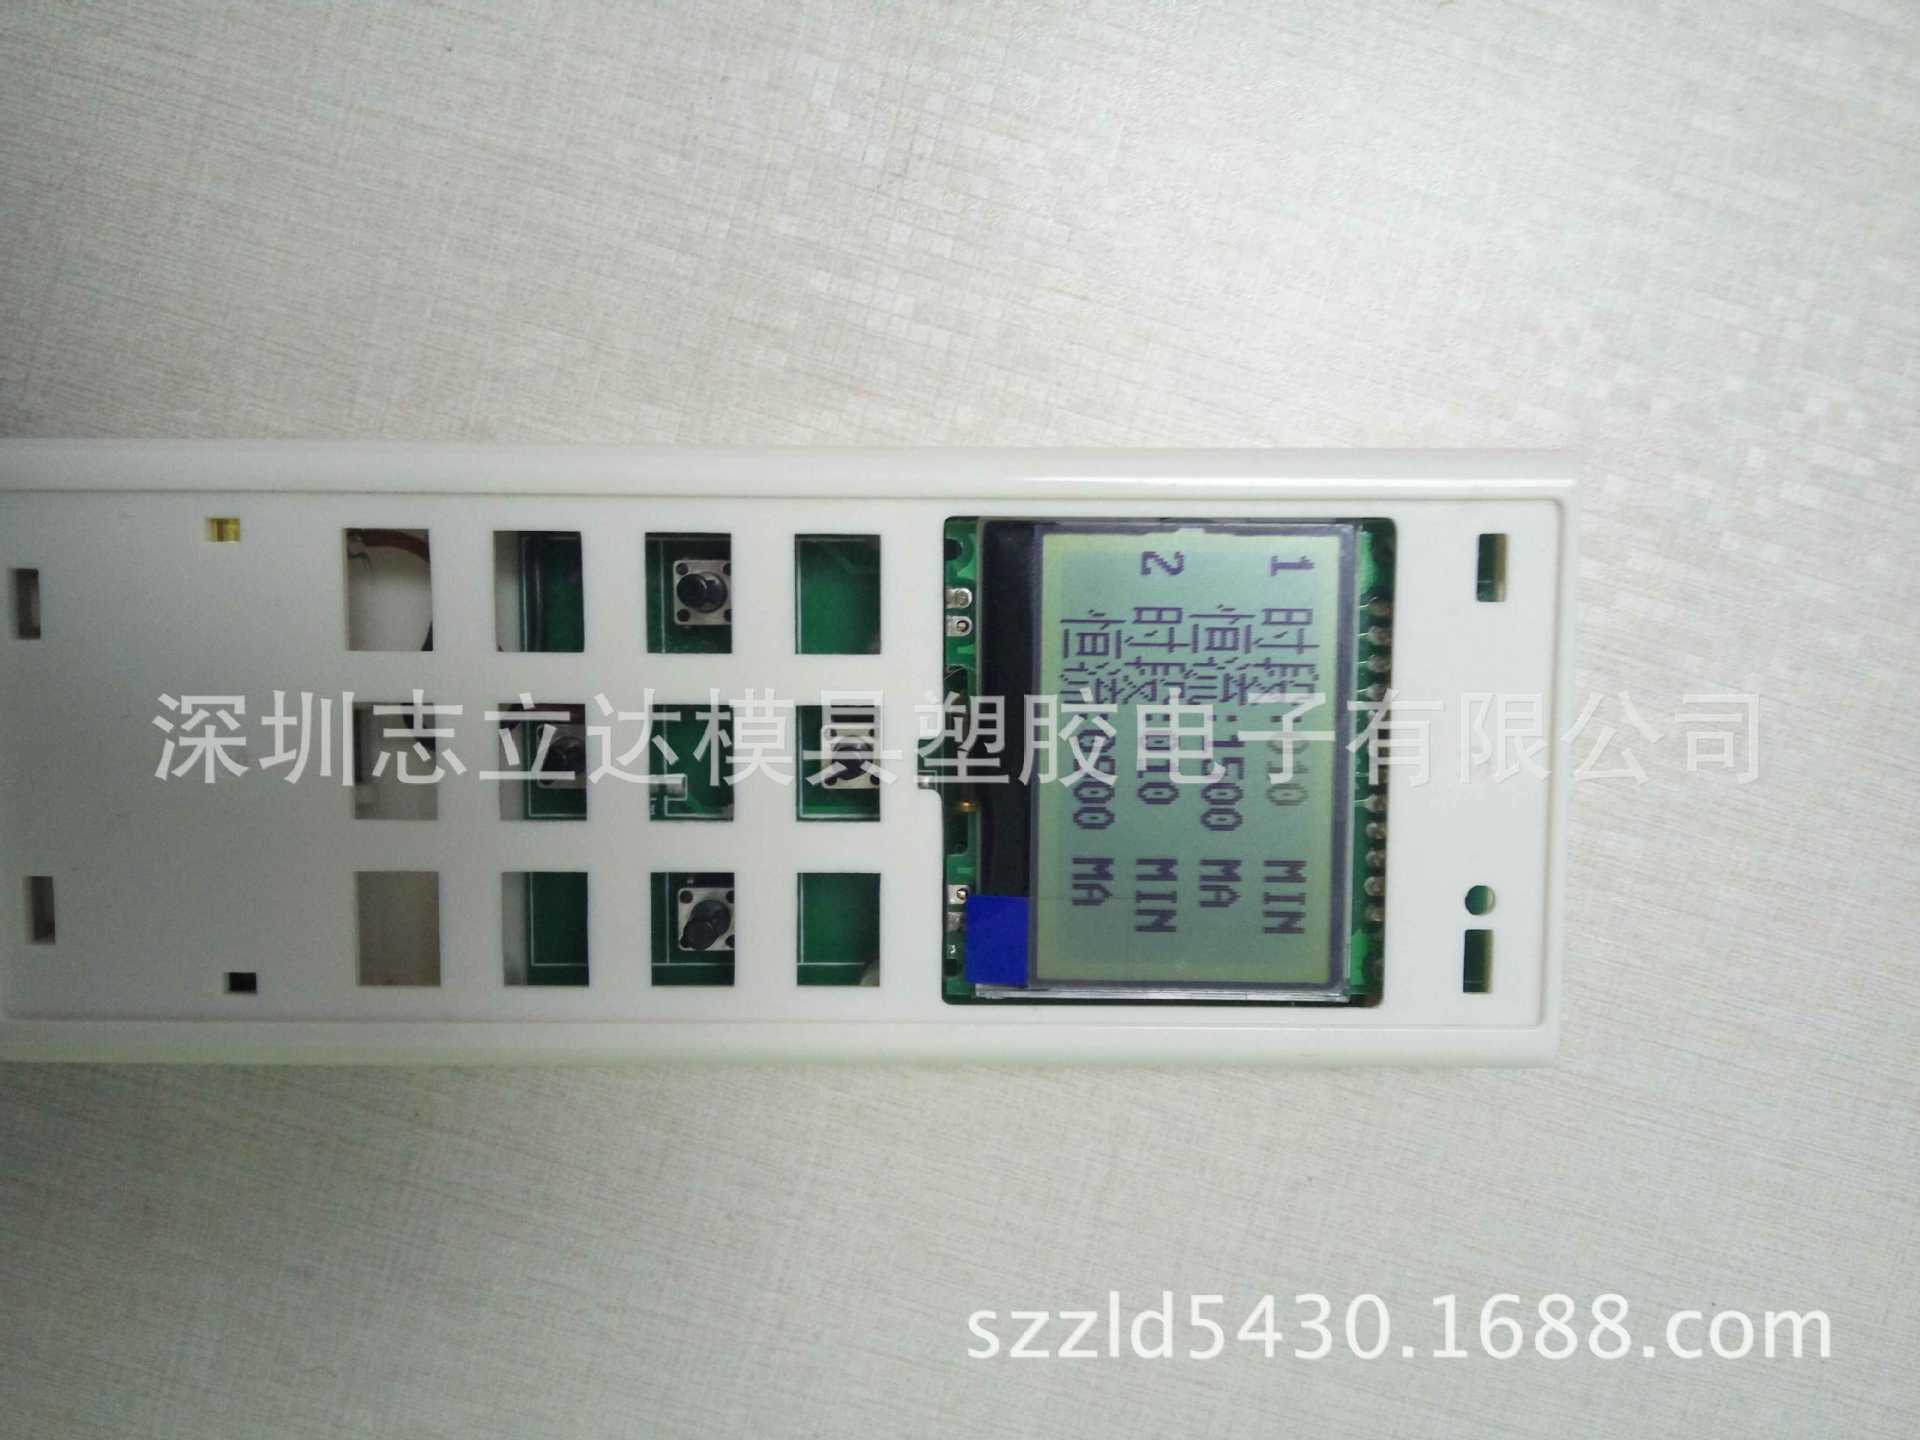 Shenzhen factory supply customized content 2.4G 433 wireless solar energy controller Dedicated Remote control Shell